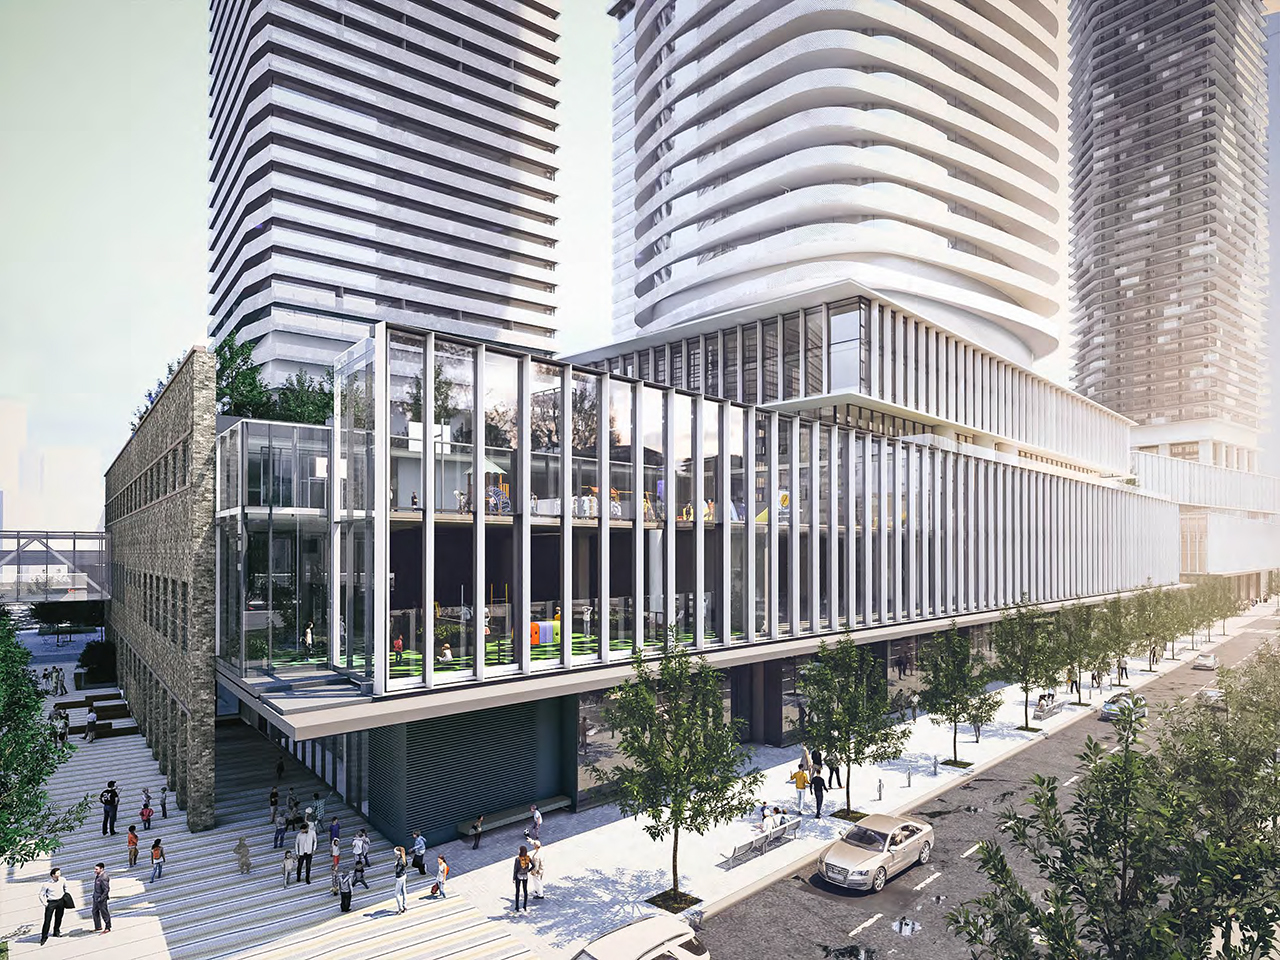 2022 UrbanToronto | Awards Menkes the on Pipeline, Way In Project Review: Advances Earning